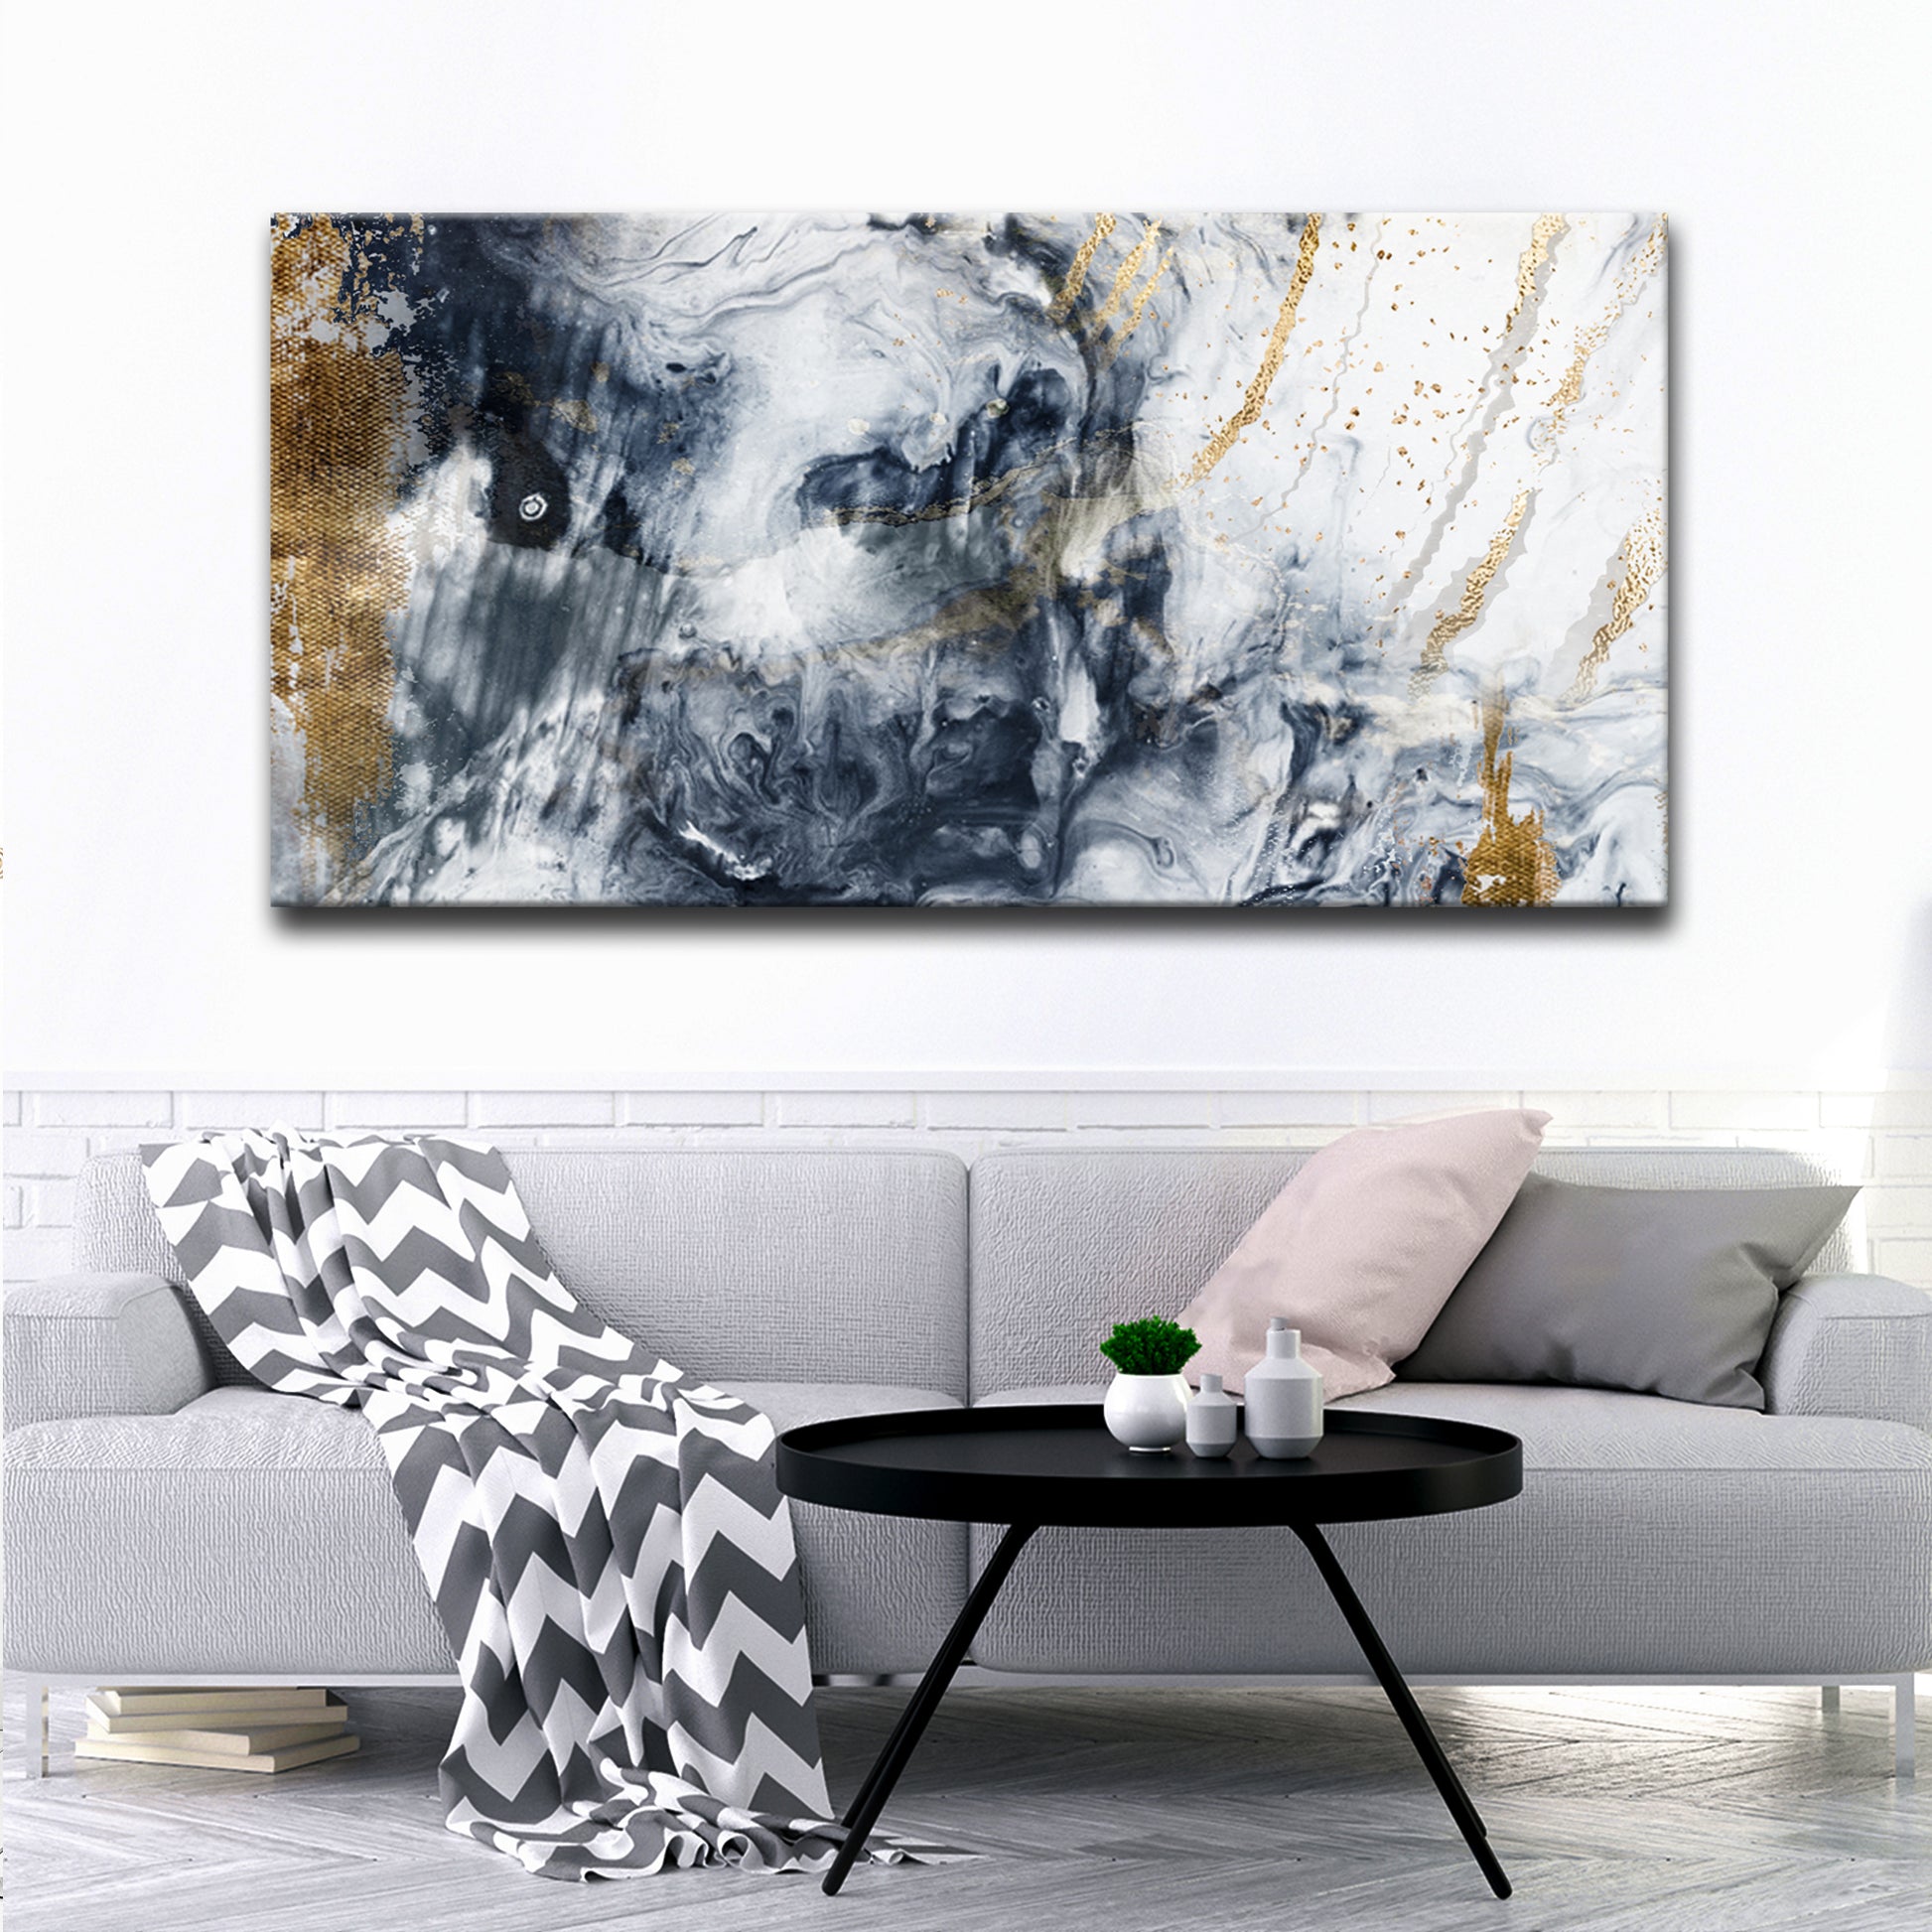 Golden Mural Abstract Painting Canvas Wall Art - Image by Tailored Canvases